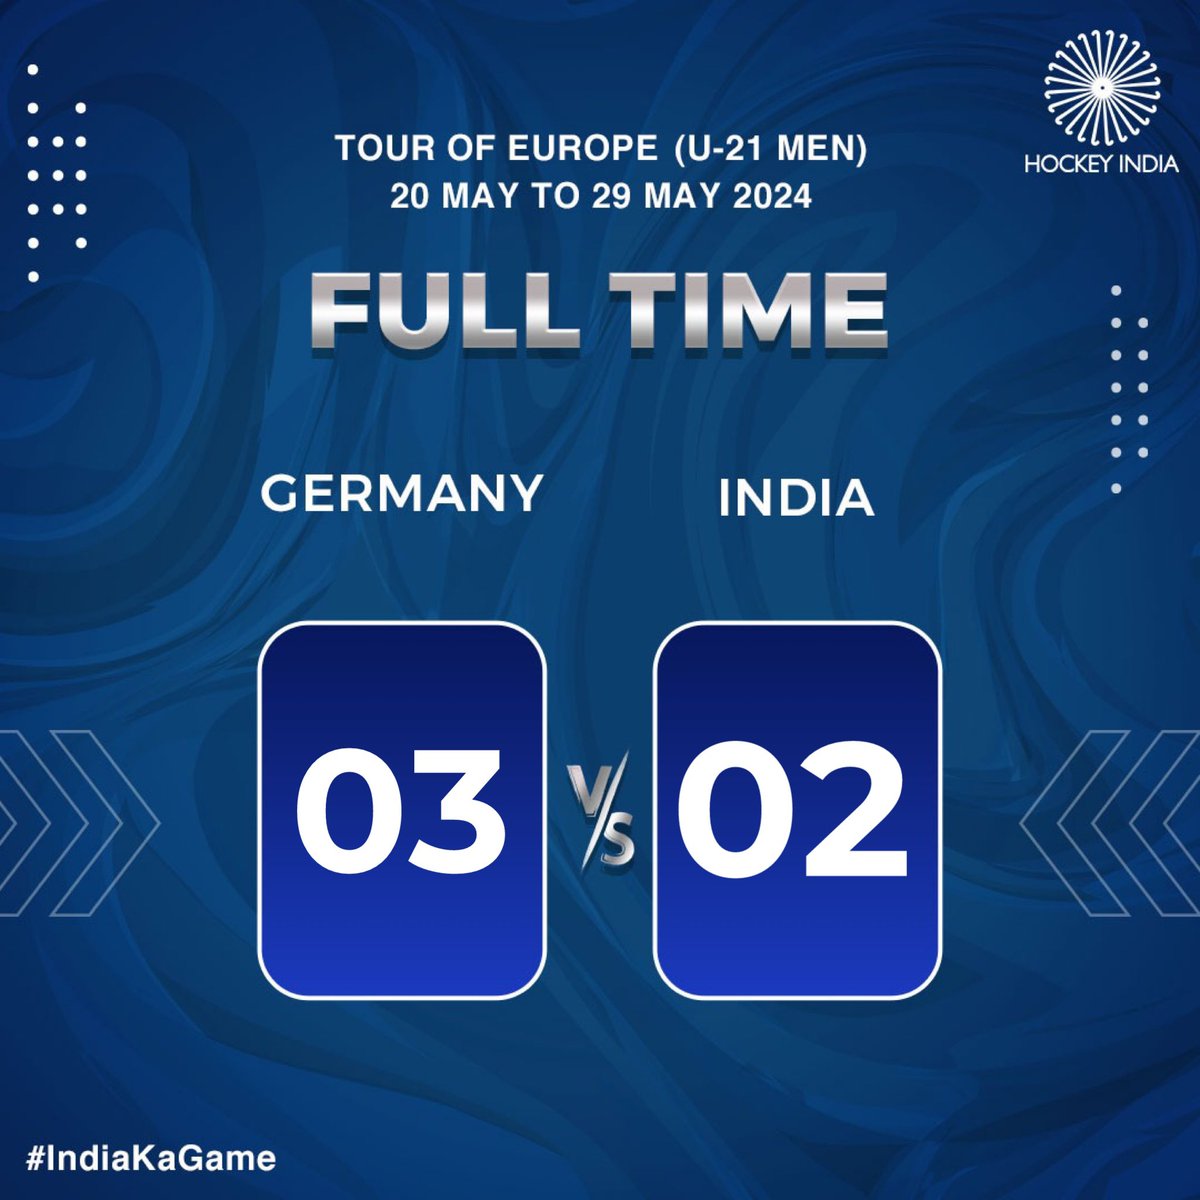 We left everything on the field , but today just wasn't our day. ❤️‍🩹🏑

#HockeyIndia #IndiaKaGame
.
.
.
.
@CMO_Odisha @FIH_Hockey @IndiaSports @Media_SAI @sports_odisha @Limca_Official @CocaCola_Ind